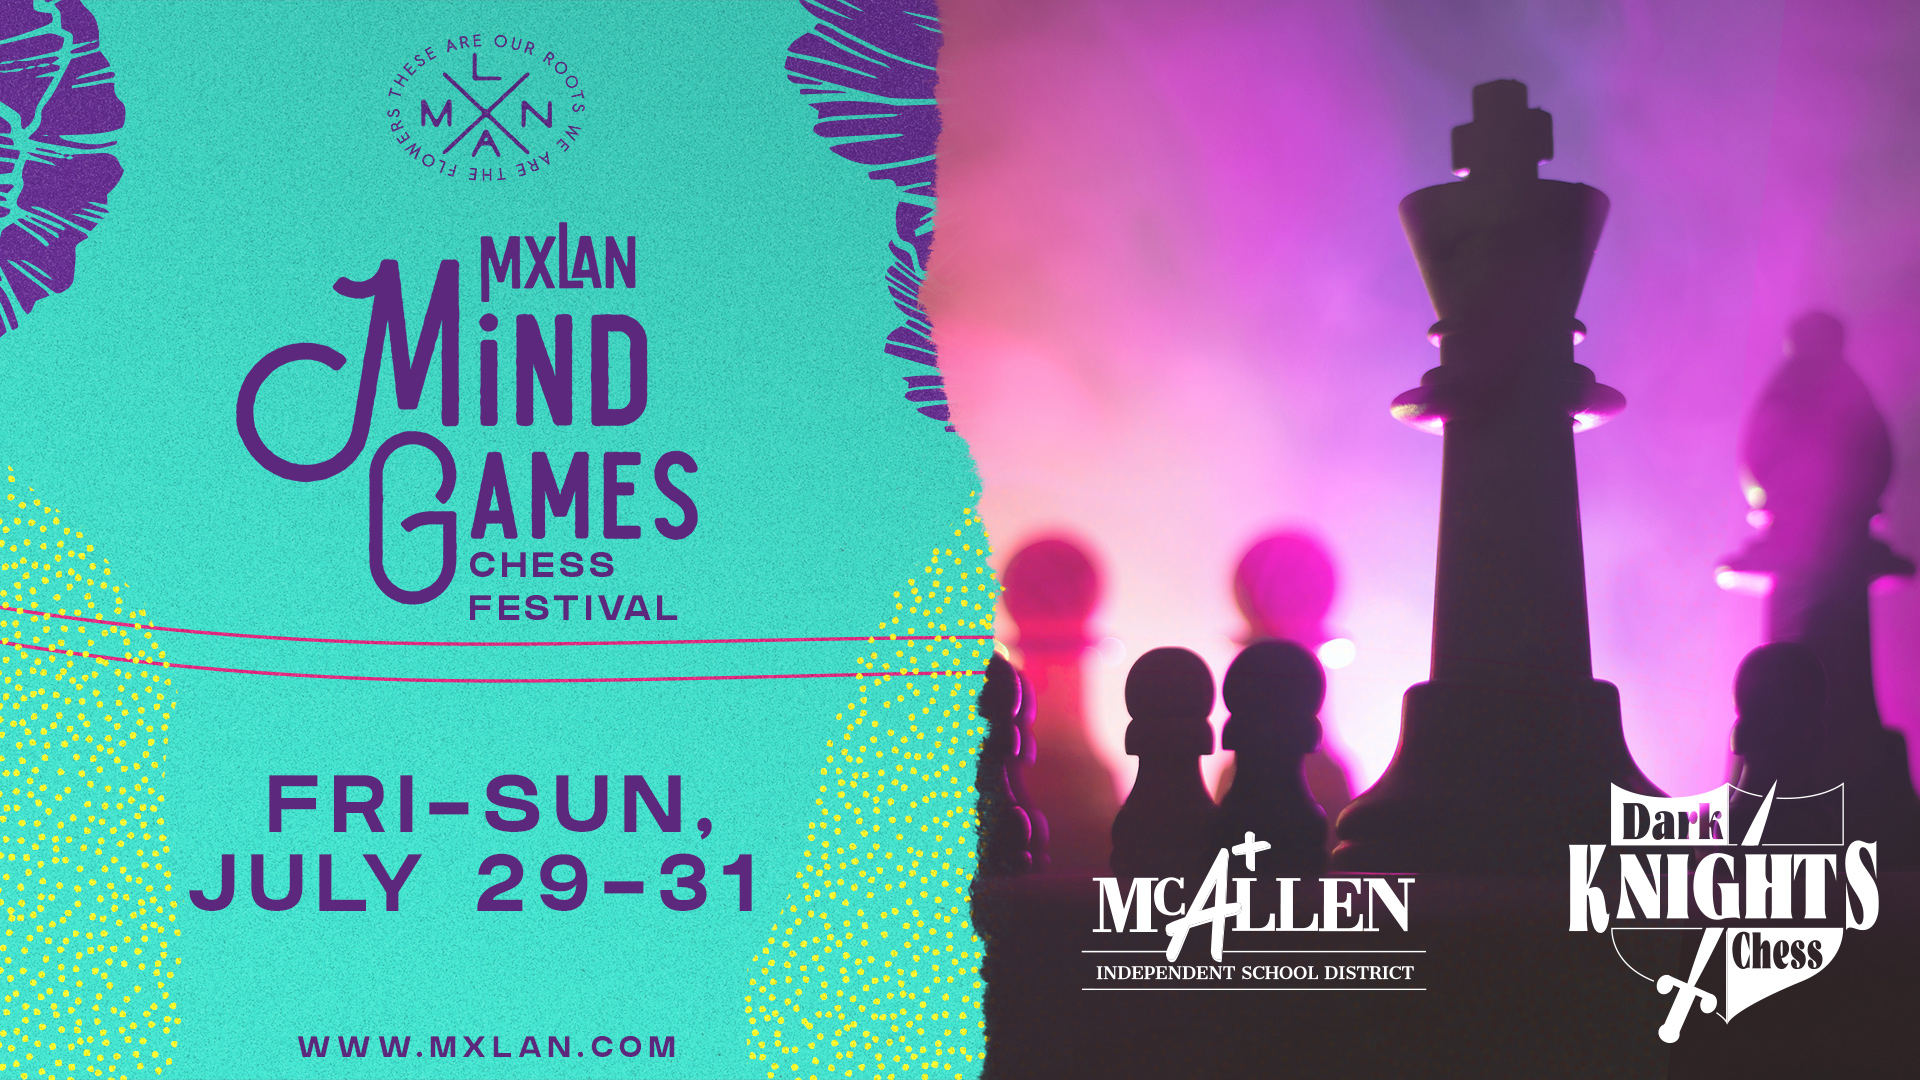 mxlan mindgames chess festvialstyle mcallen latino latinx music arts best fesitval in texas acl south by south west coachella rio grande valley south padre island brownsville indie best latino festival in us breakthrough stage